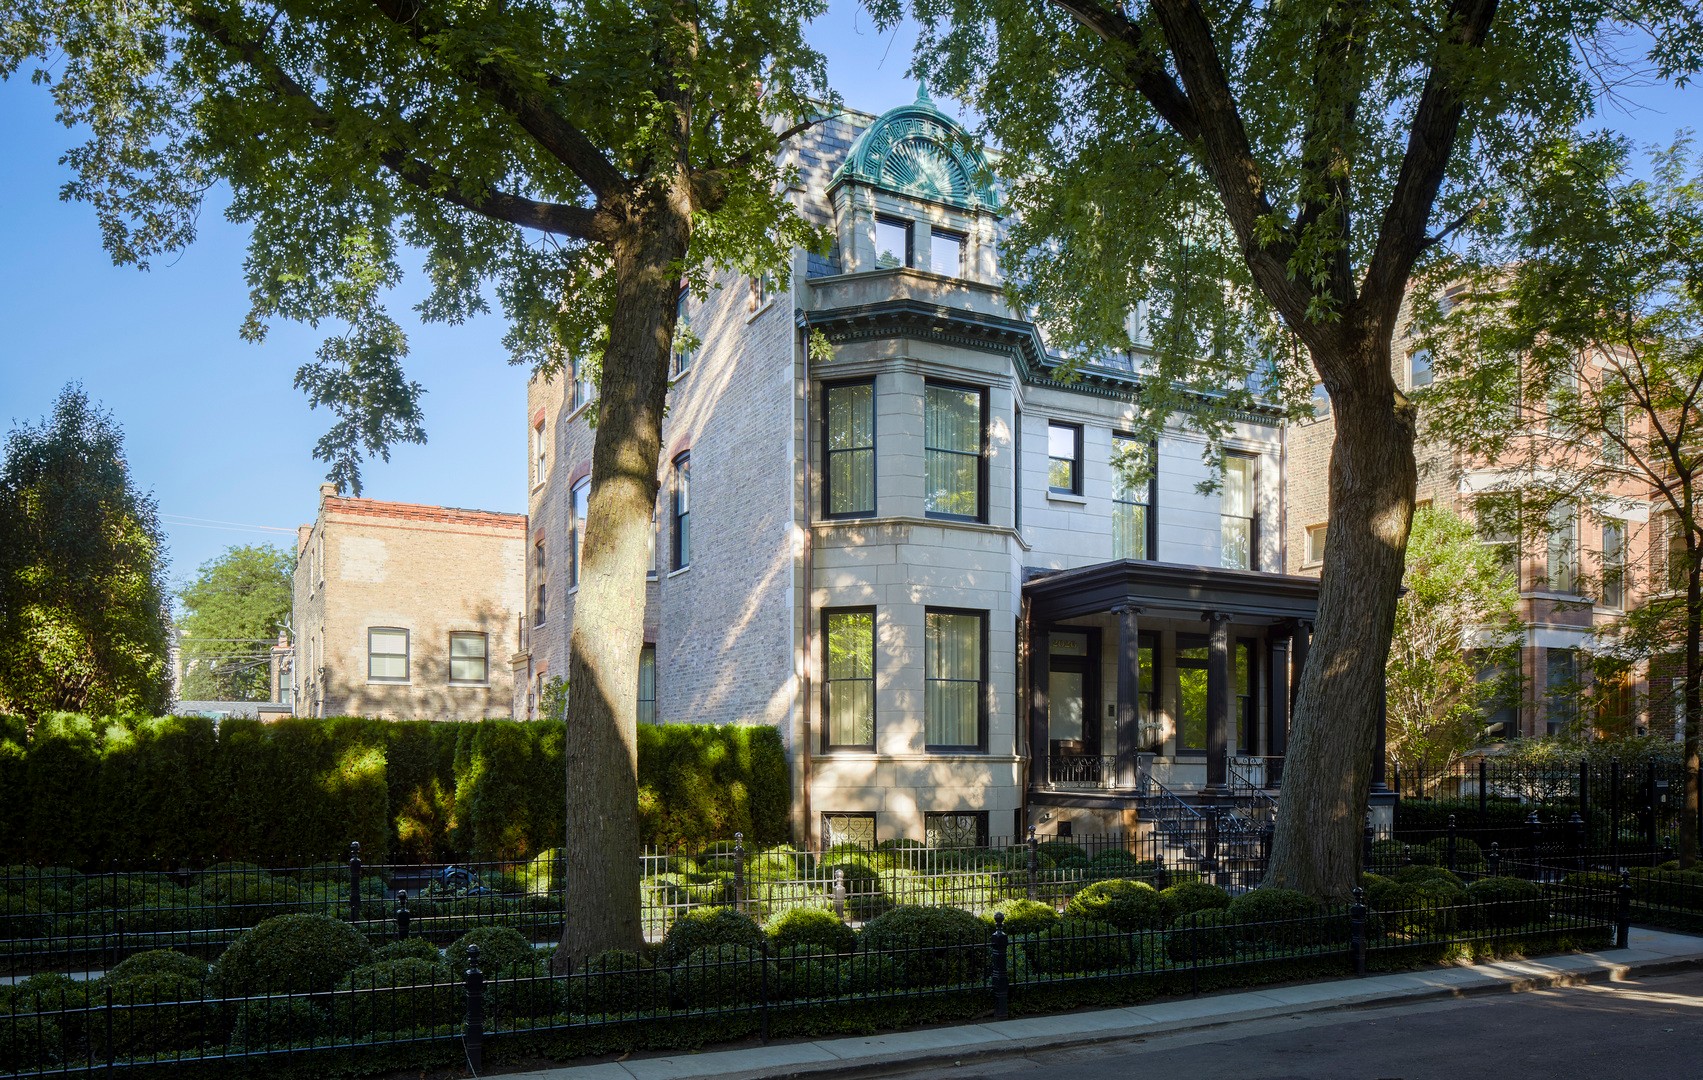 2026 N Kenmore Avenue : a Luxury Single Family Home for Sale - Lincoln Park Chicago, Illinois